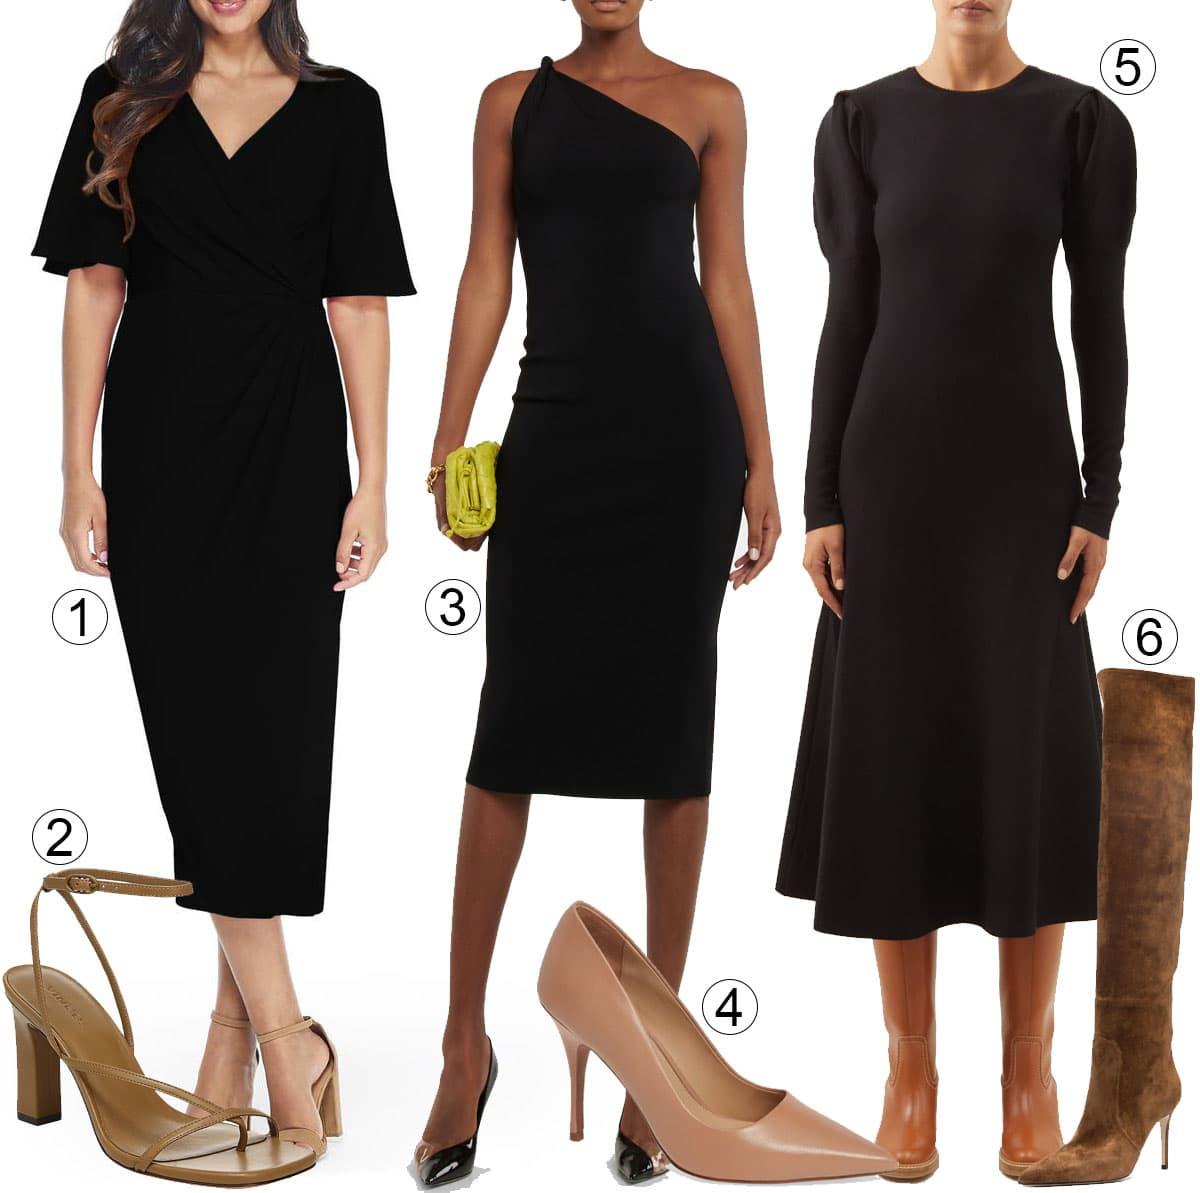 What Color Shoes To Wear With A Black Dress: Best LBD Looks ...